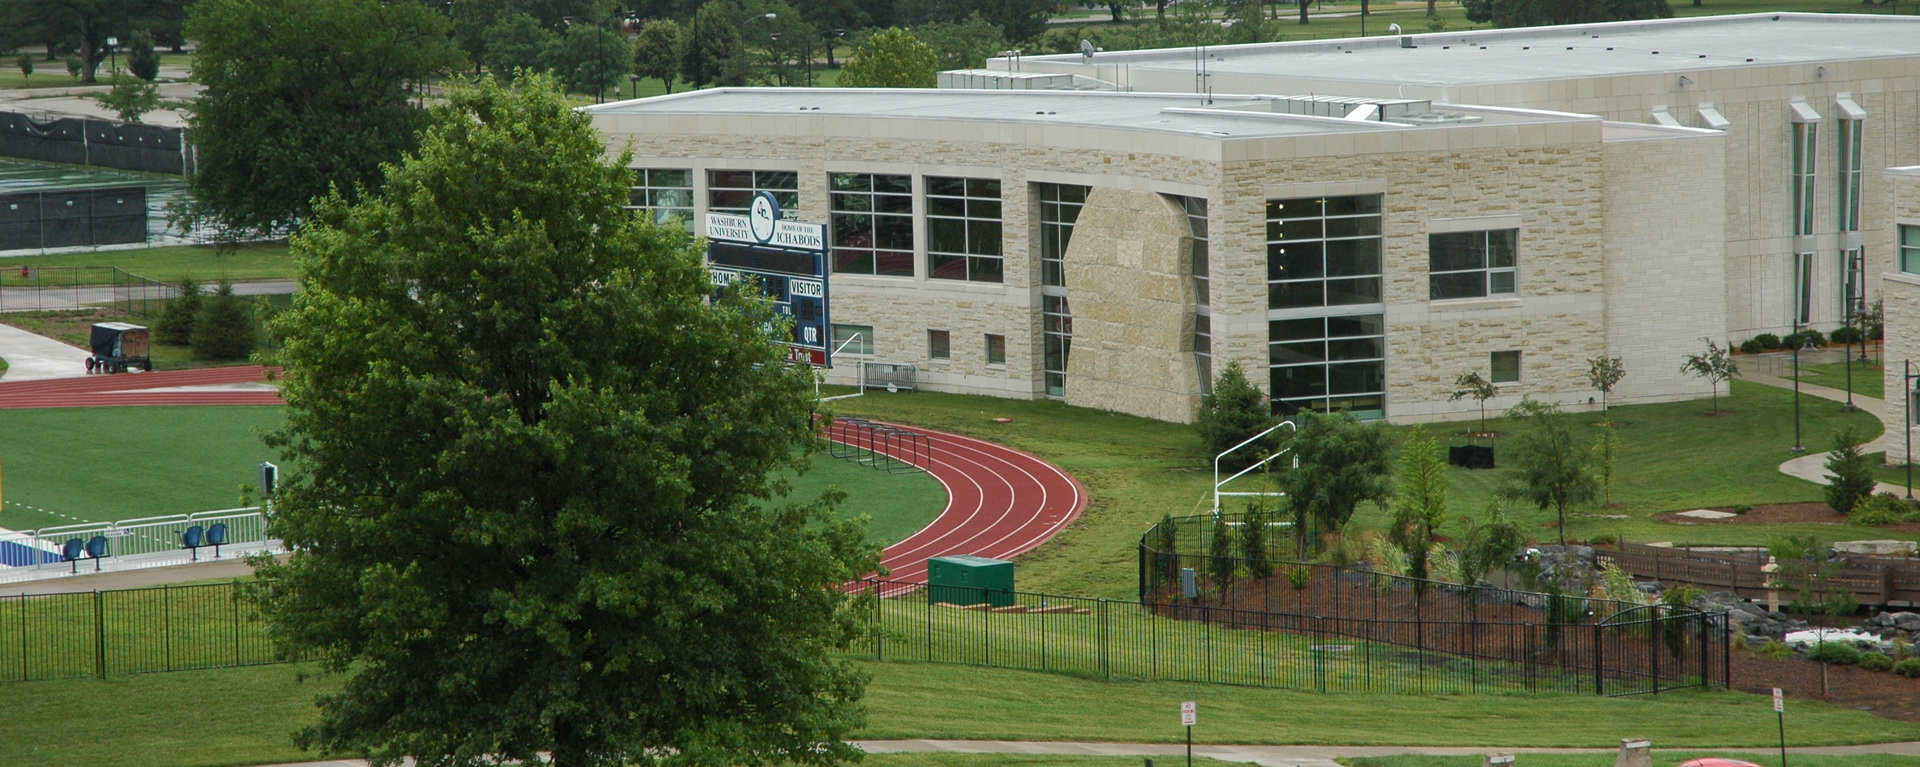 aerial view of the rec center